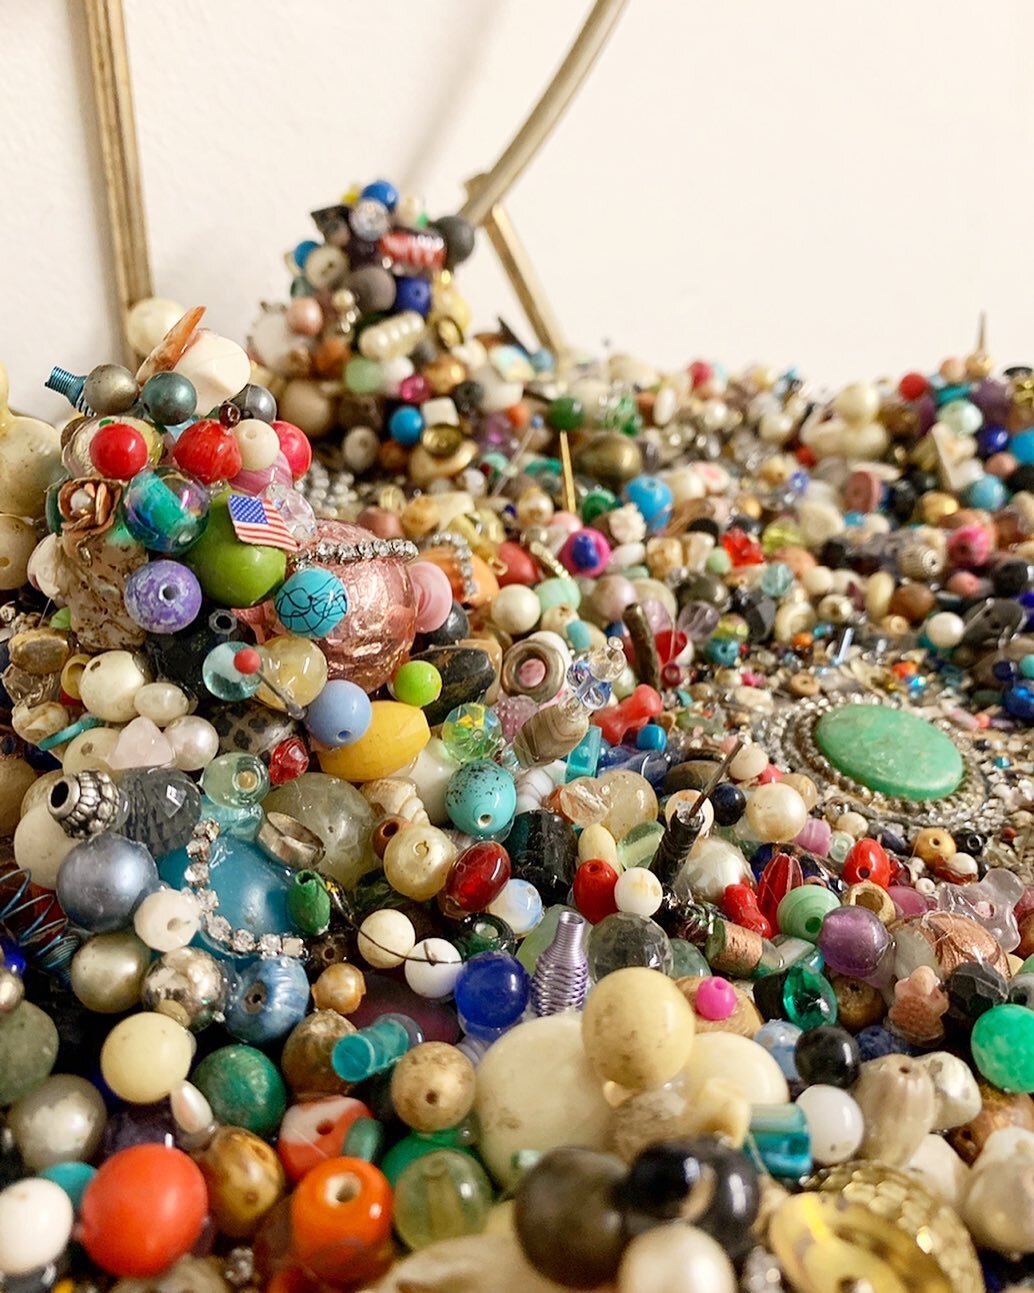 Bead details #assemblageart #beads #bobbles #rhinestones #costumejewelry #accumulation